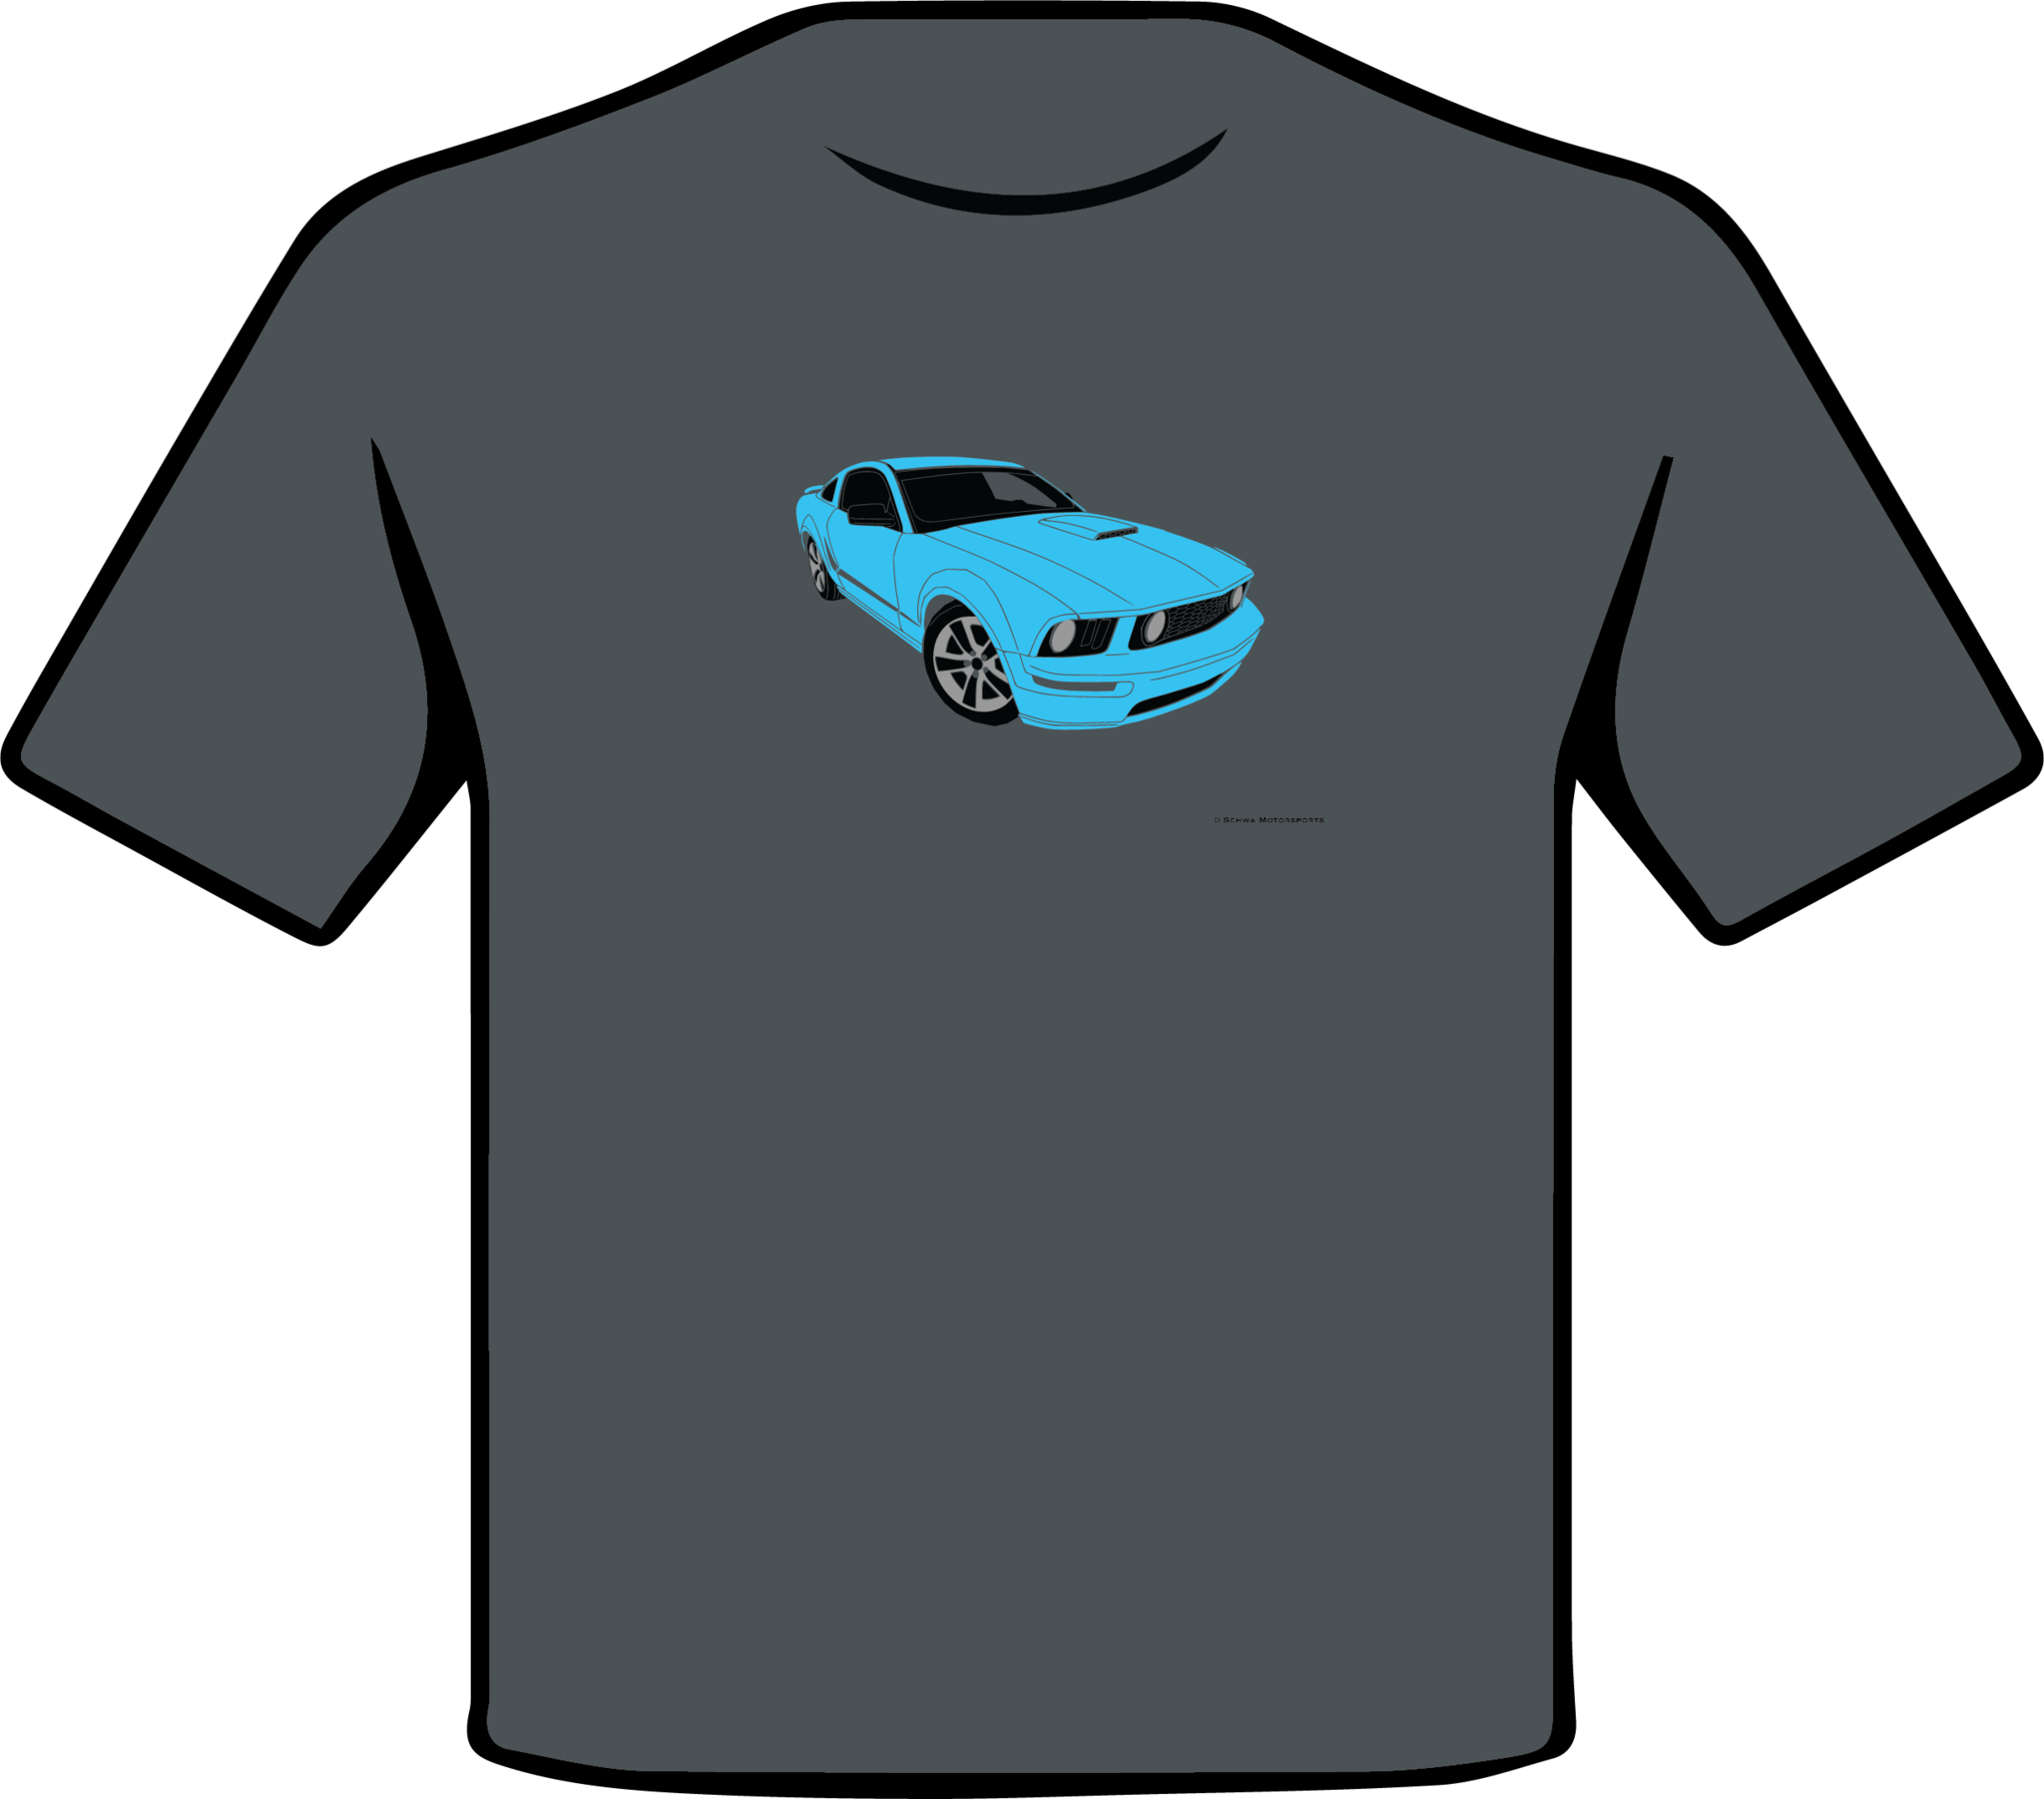 Ford Mustang Fifth Generation Front – and T-Shirt Color Angle Motorsports Schwa Designs 3/4 Multi